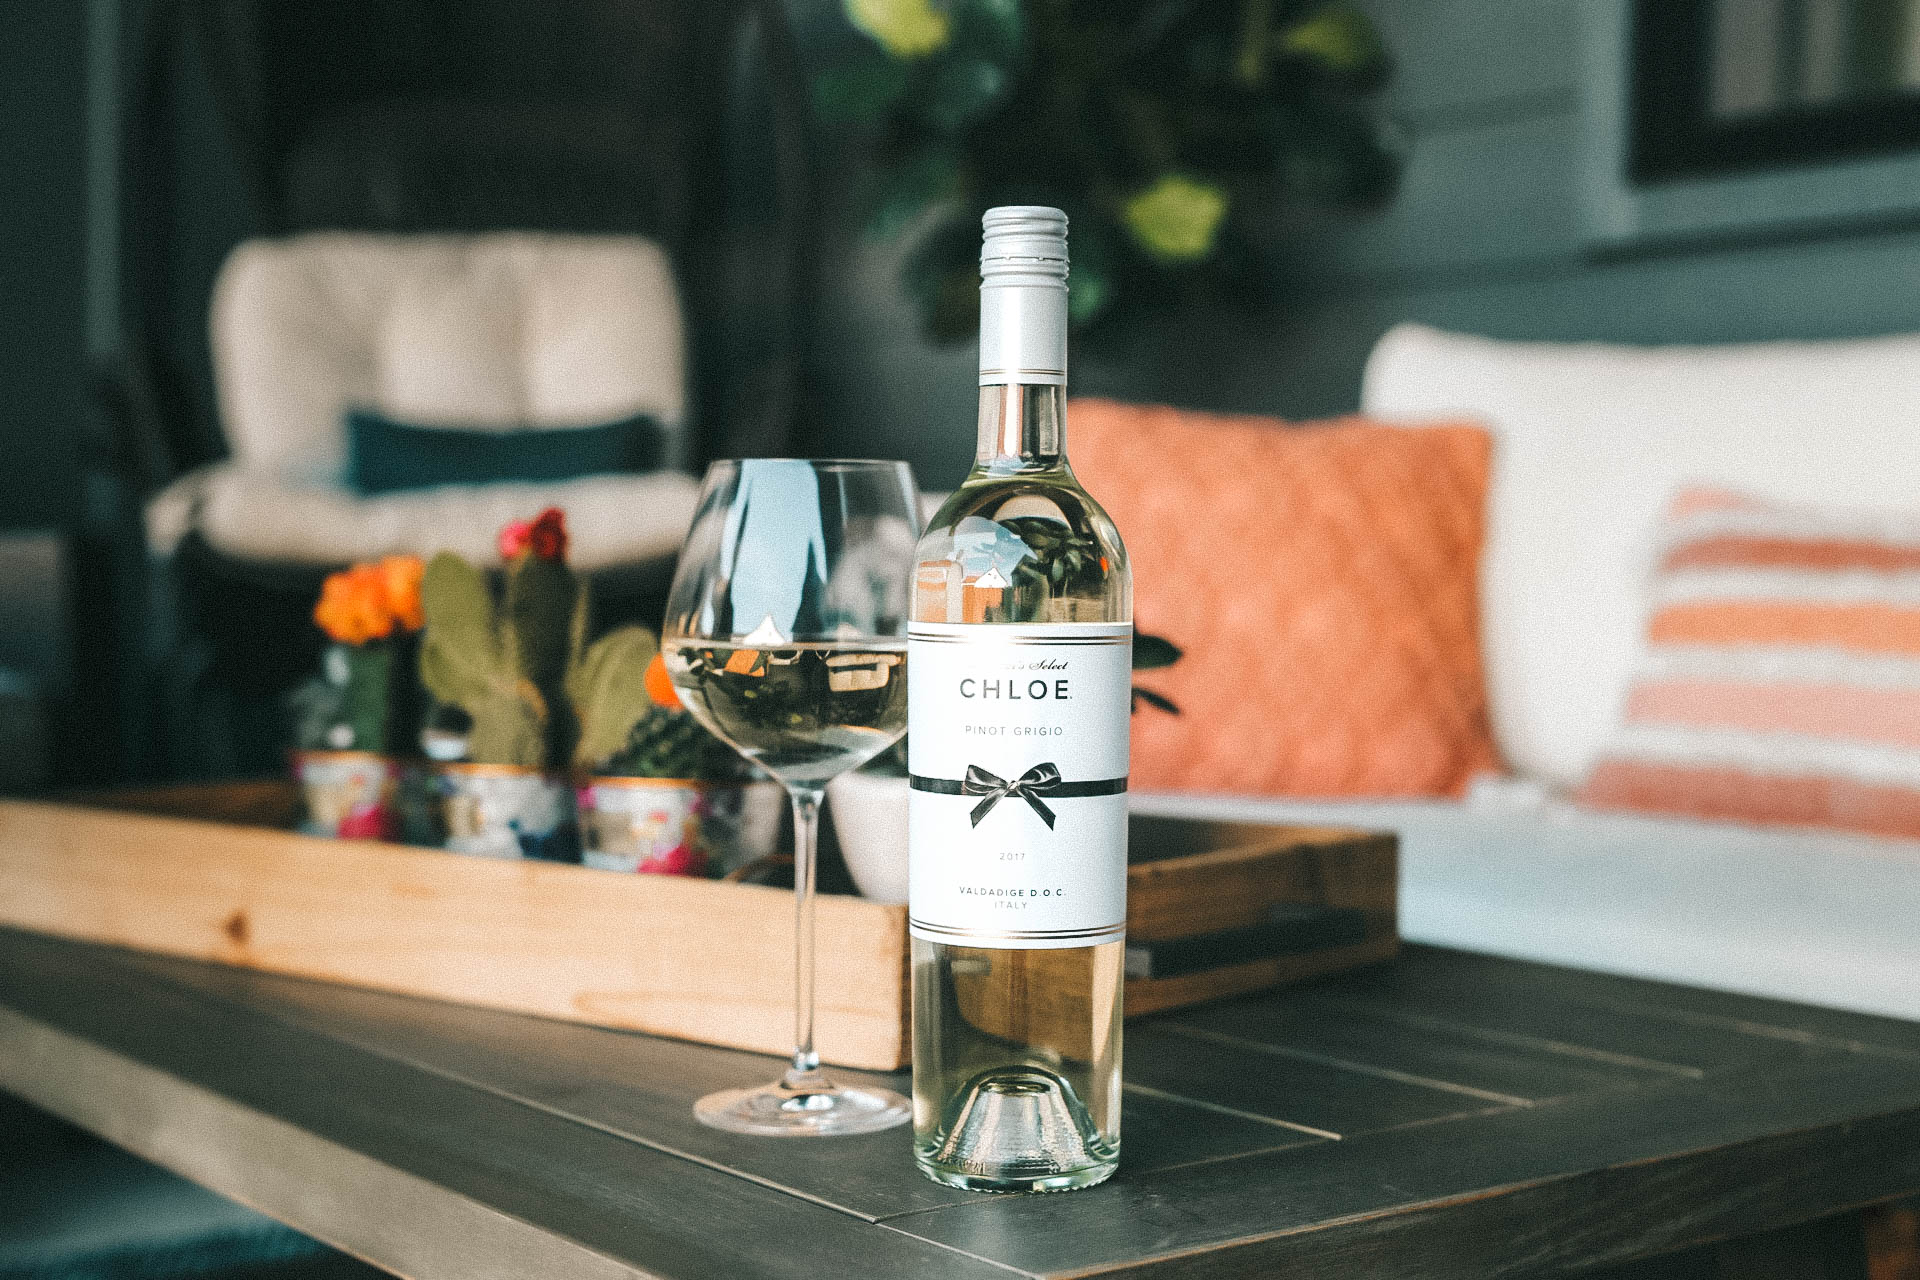 Celebrating Women in Film with Chloe Wine Collection by popular Austin life and style blog, Dressed to Kill: image of a bottle of Chloe pinot grigio wine on a wooden coffee table with a wine glass resting next to it.